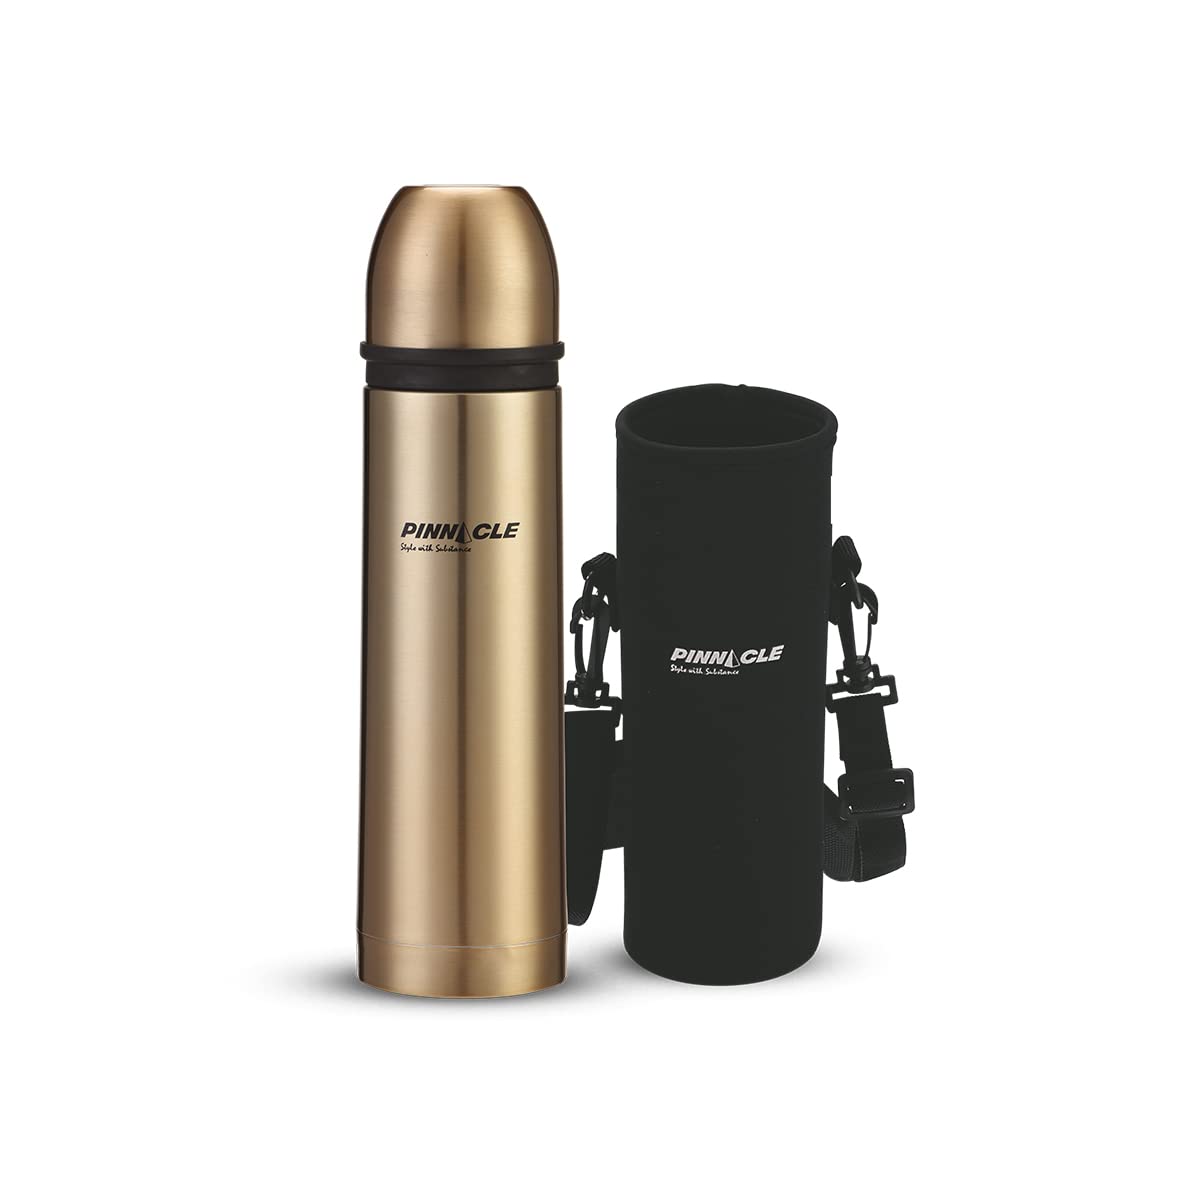 Pinnacle Stainless Steel Palladium Vacuum Flask Water Bottle|Thermos Flask 1 Litre|Green Tea, Coffee, Tea&Water|Thermos Flask Water Bottle For Kids&Adults|Gold